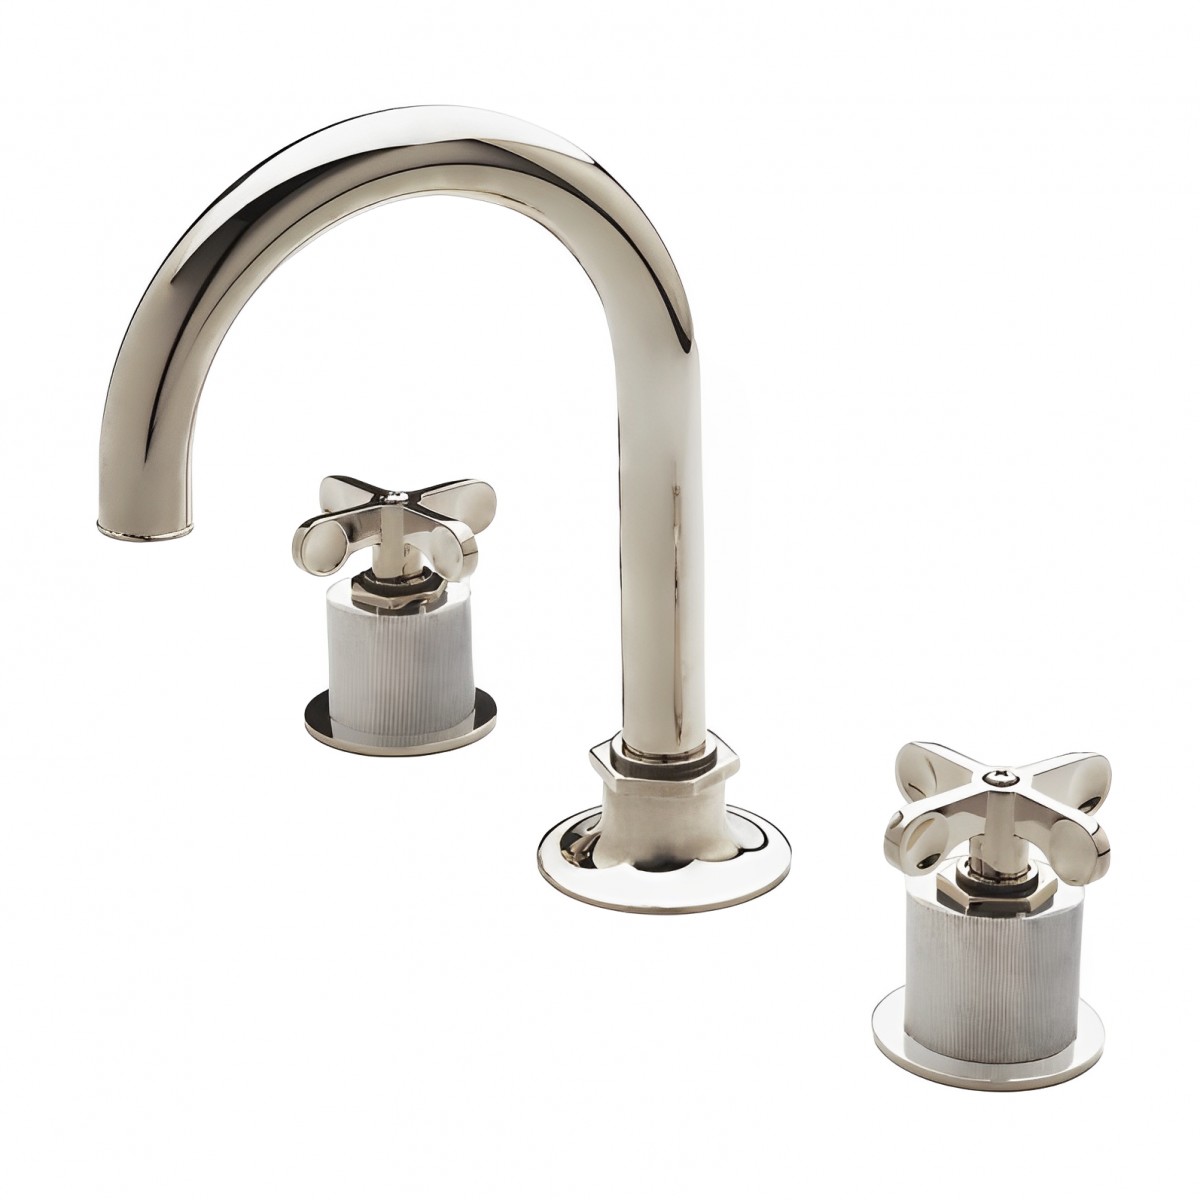 Henry Gooseneck Three Hole Deck Mounted Lavatory Faucet with Coin Edge Cylinders and Metal Cross Handles